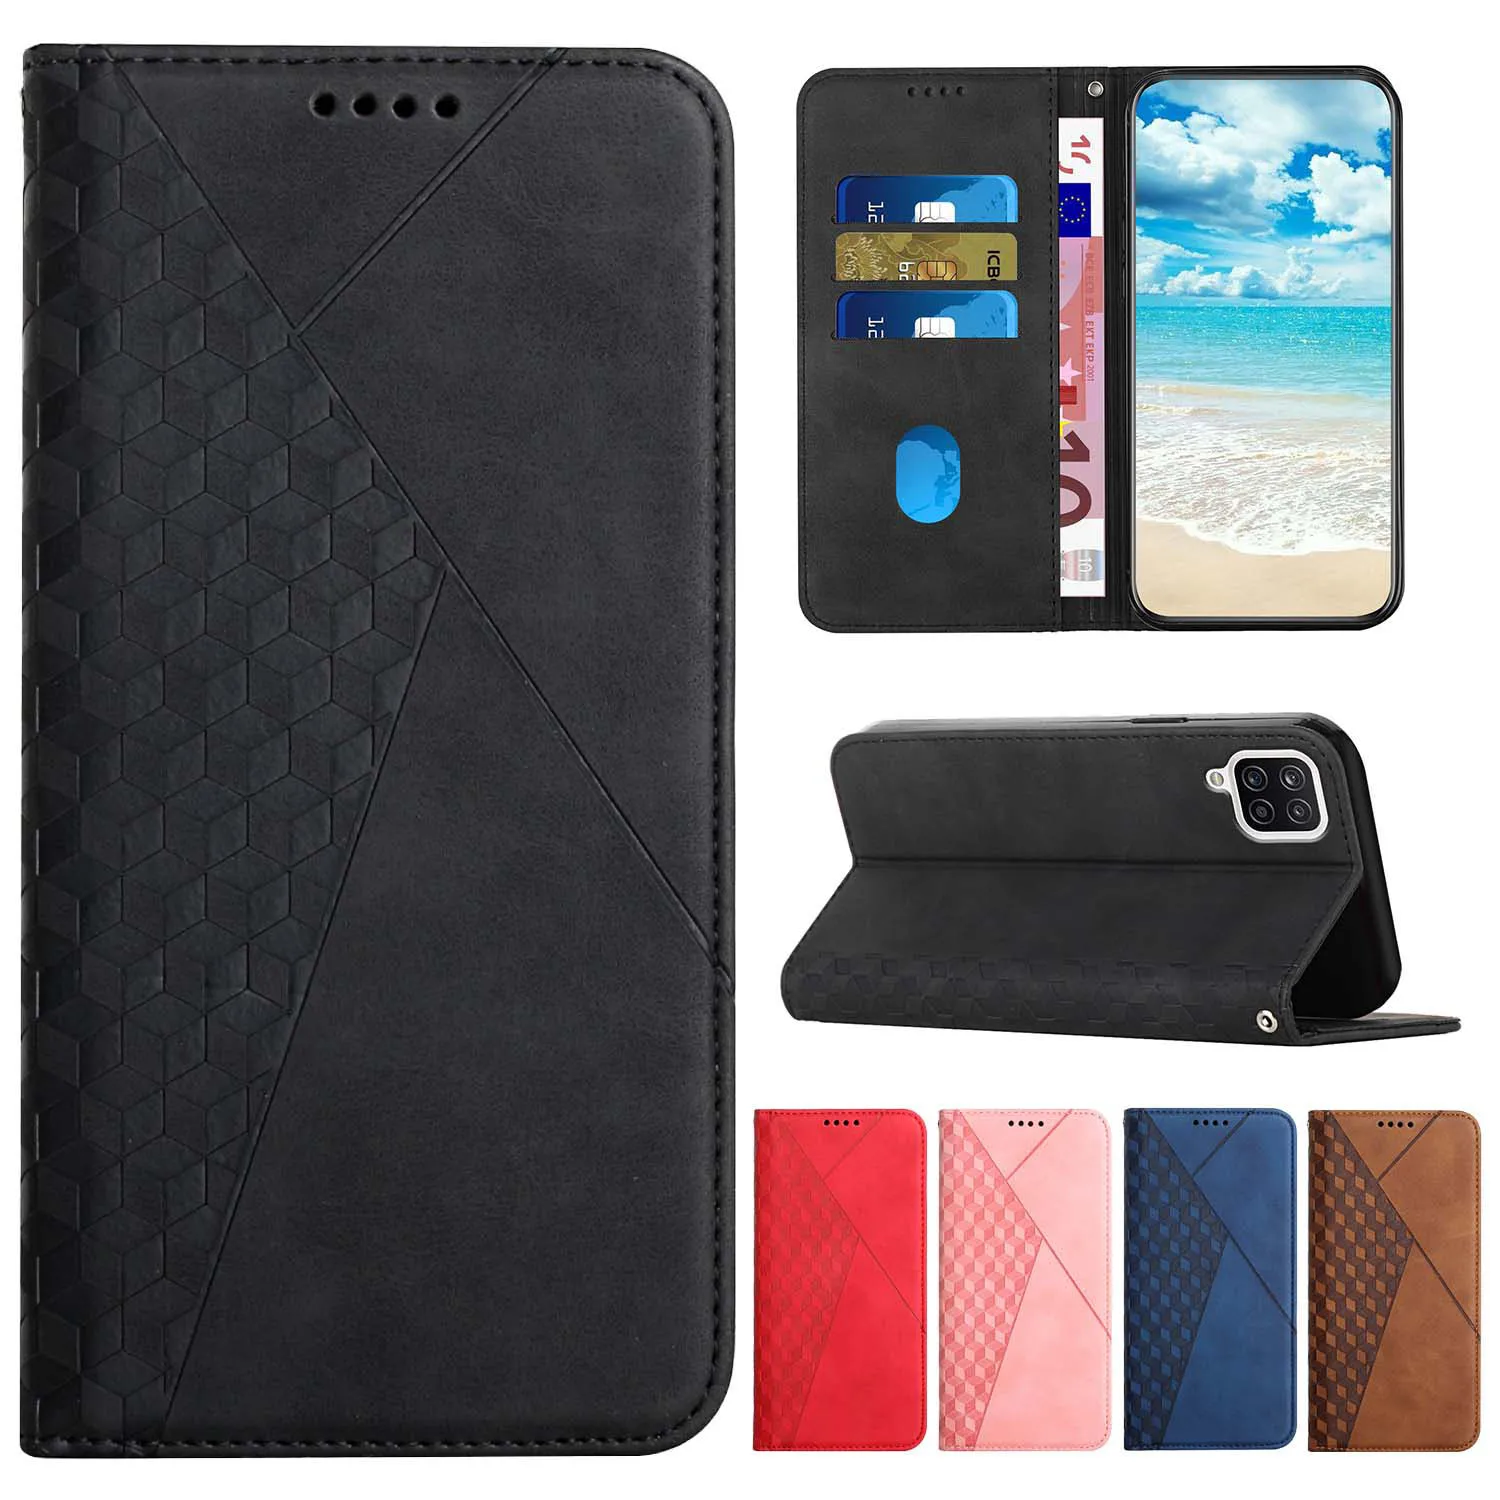 

Magnetic Leather Case For Samsung Galaxy A12 A22 A32 A52 A72 A13 A23 A33 A53 A73 A02S A03S A03 Core M22 M32 Card Slot Book Cover